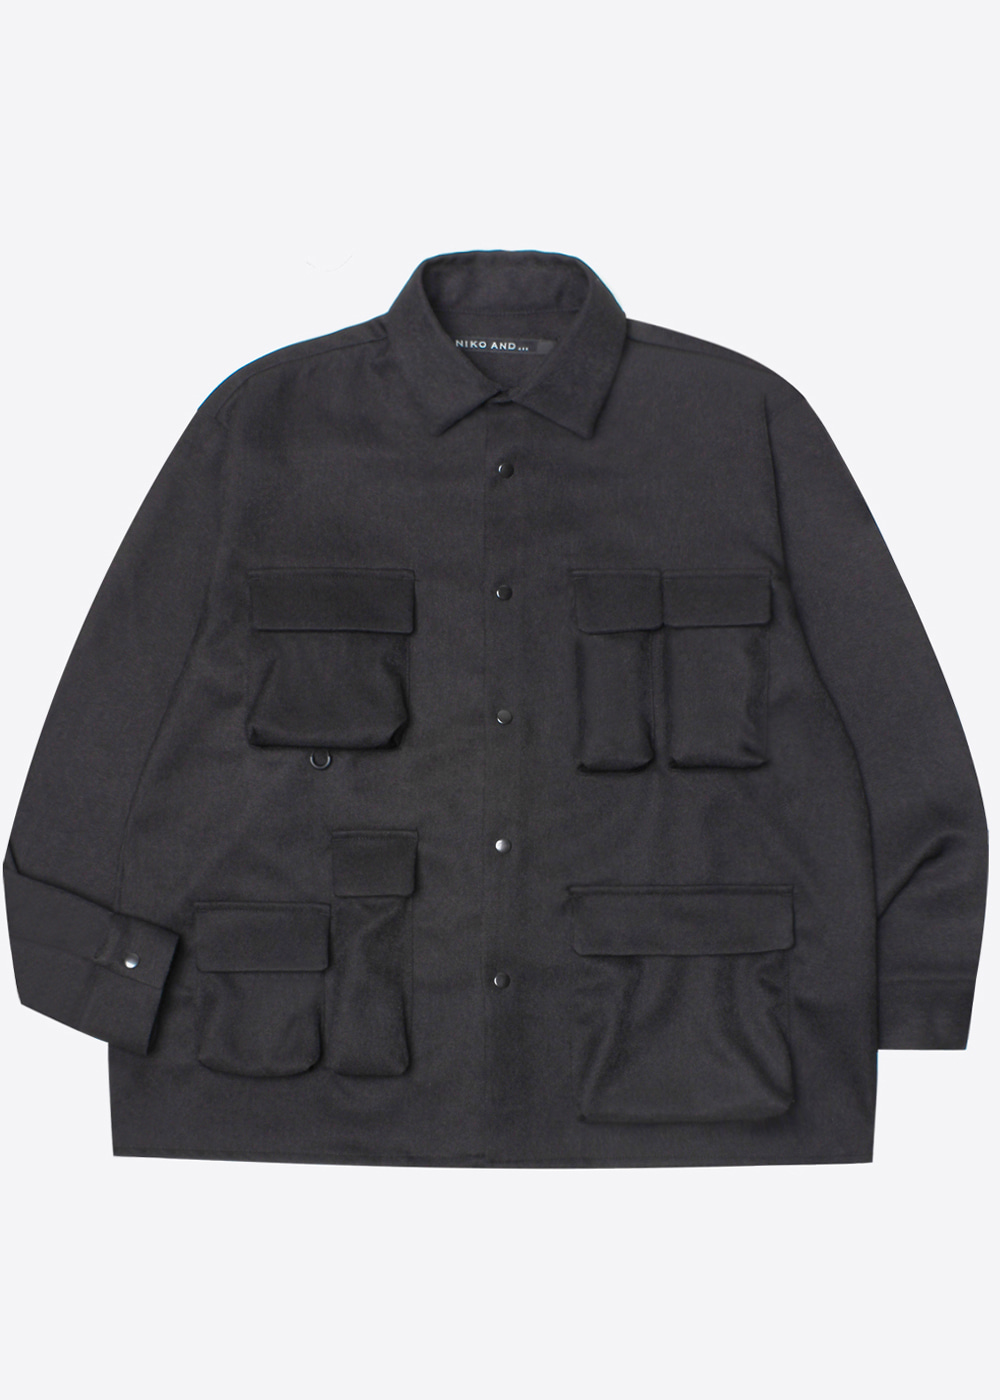 NIKO AND’over fit’ poly multi pocket jacket